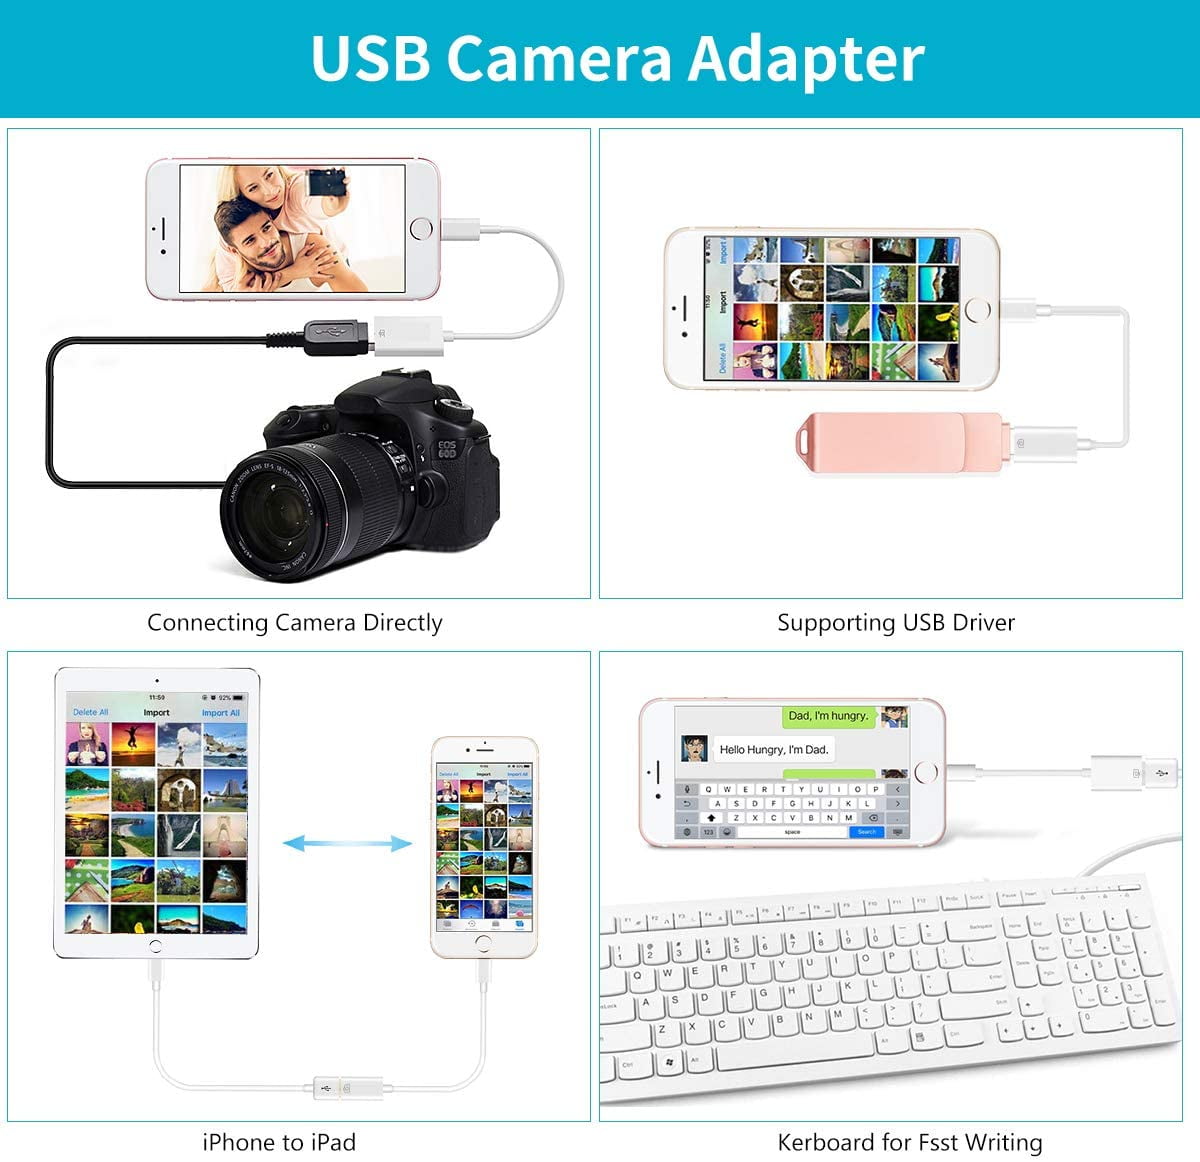 Apple Lightning to USB Camera Adapter USB 3.0 OTG Cable Adapter Compatible  with iPhone/iPad,USB Female Supports Connect Card Reader,U